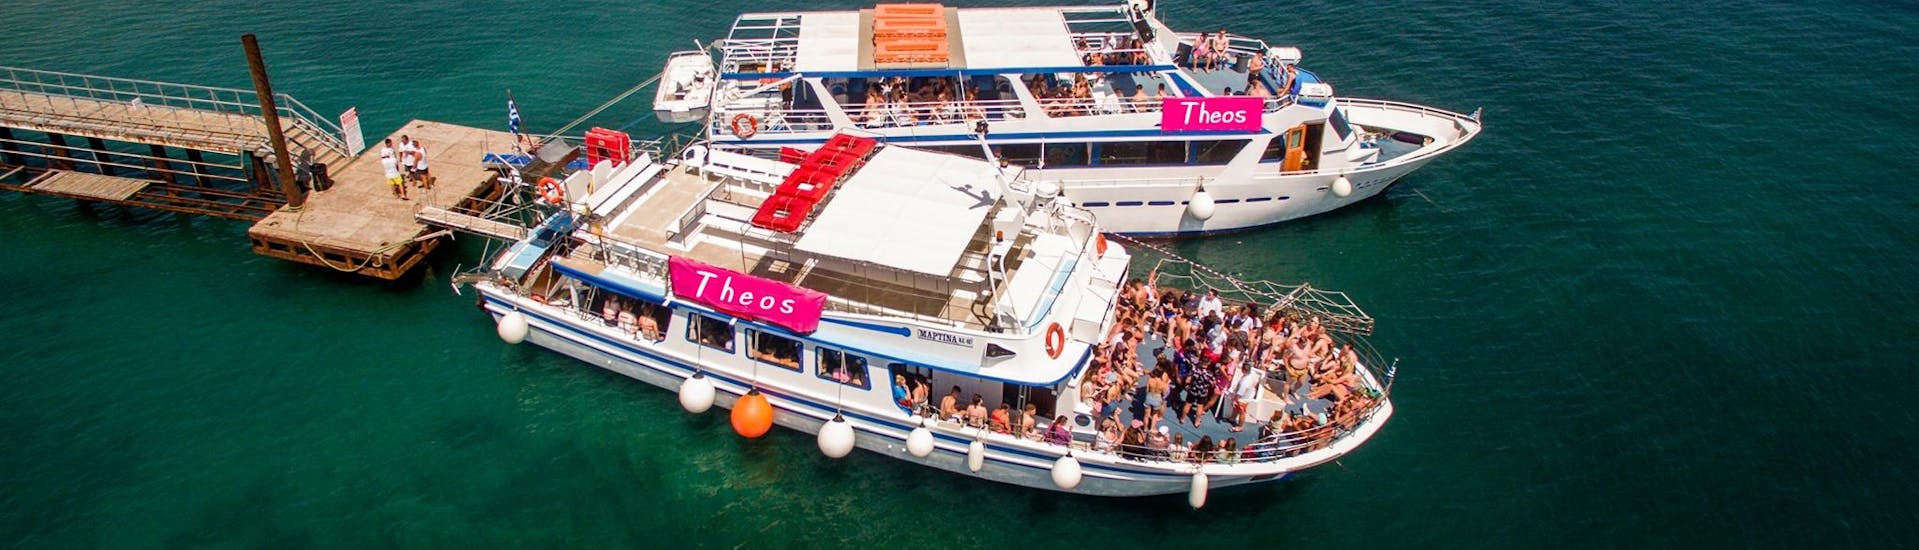 The boats of Captain Theo Corfu Cruises on the Ionian Sea that are used for the boat trips.